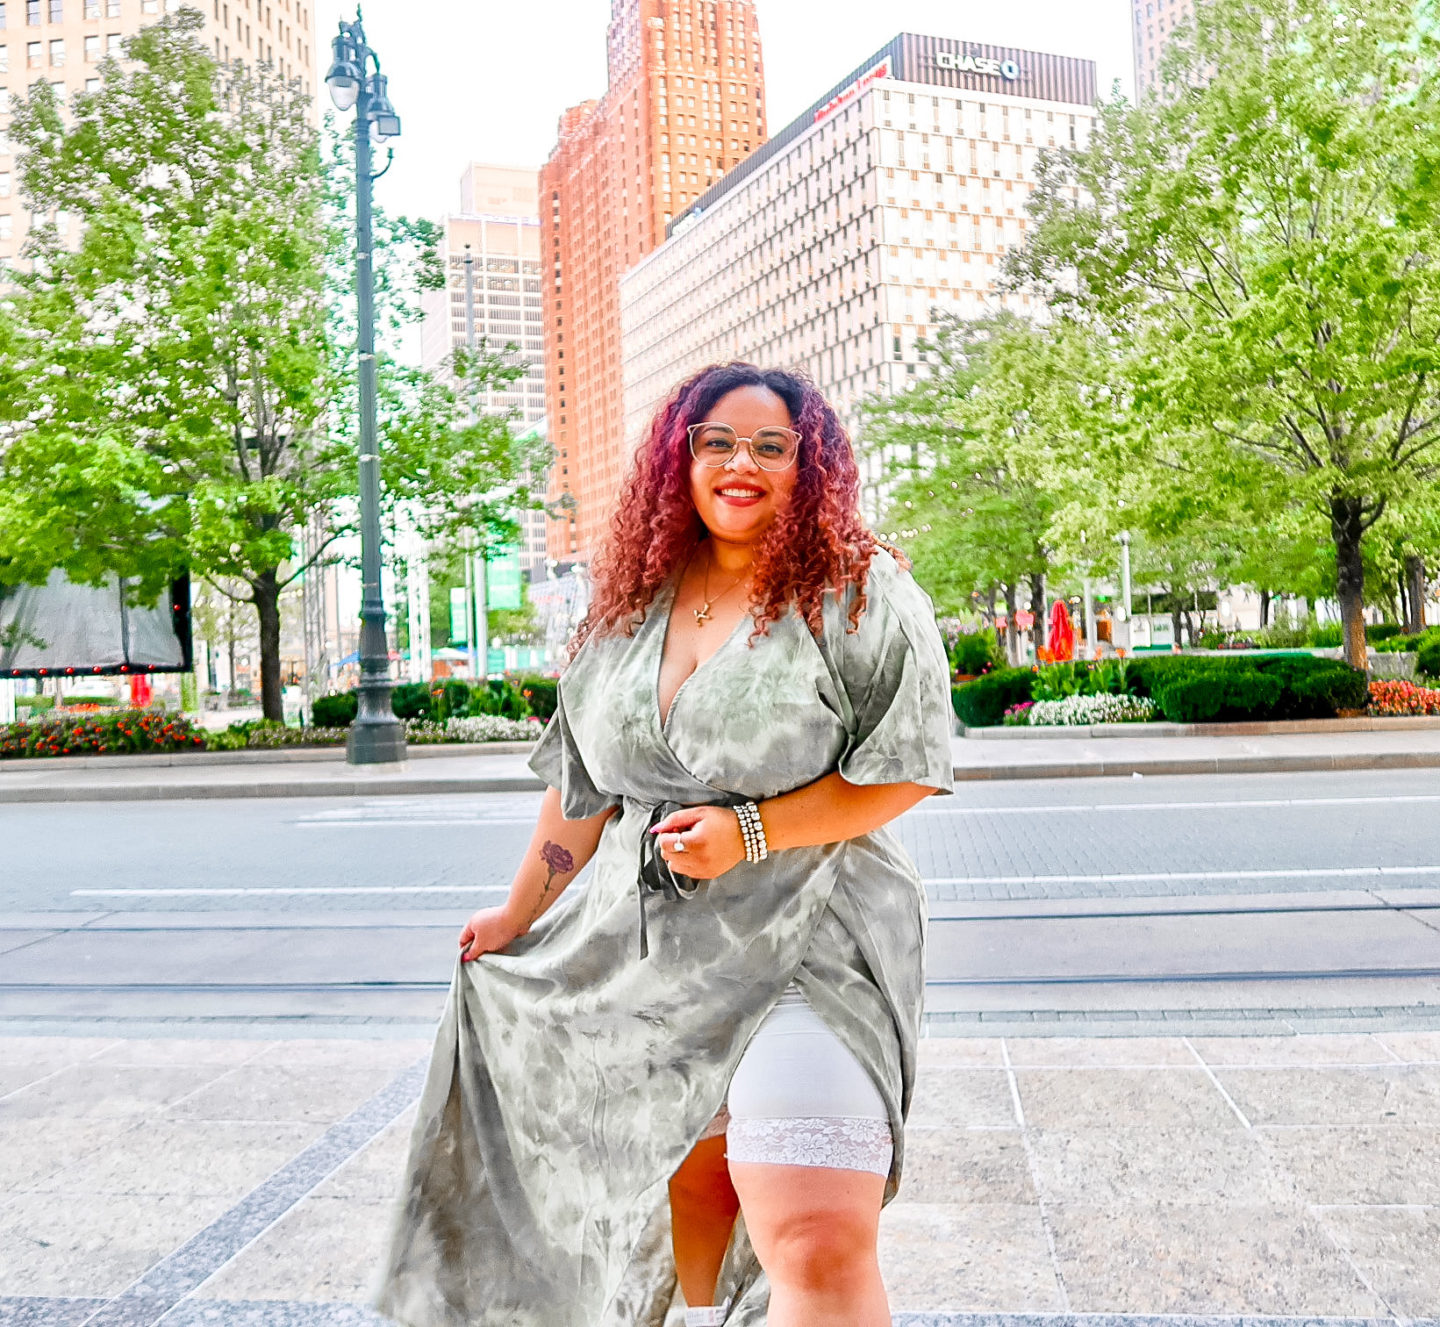 Travel Outfits for Curvy Women